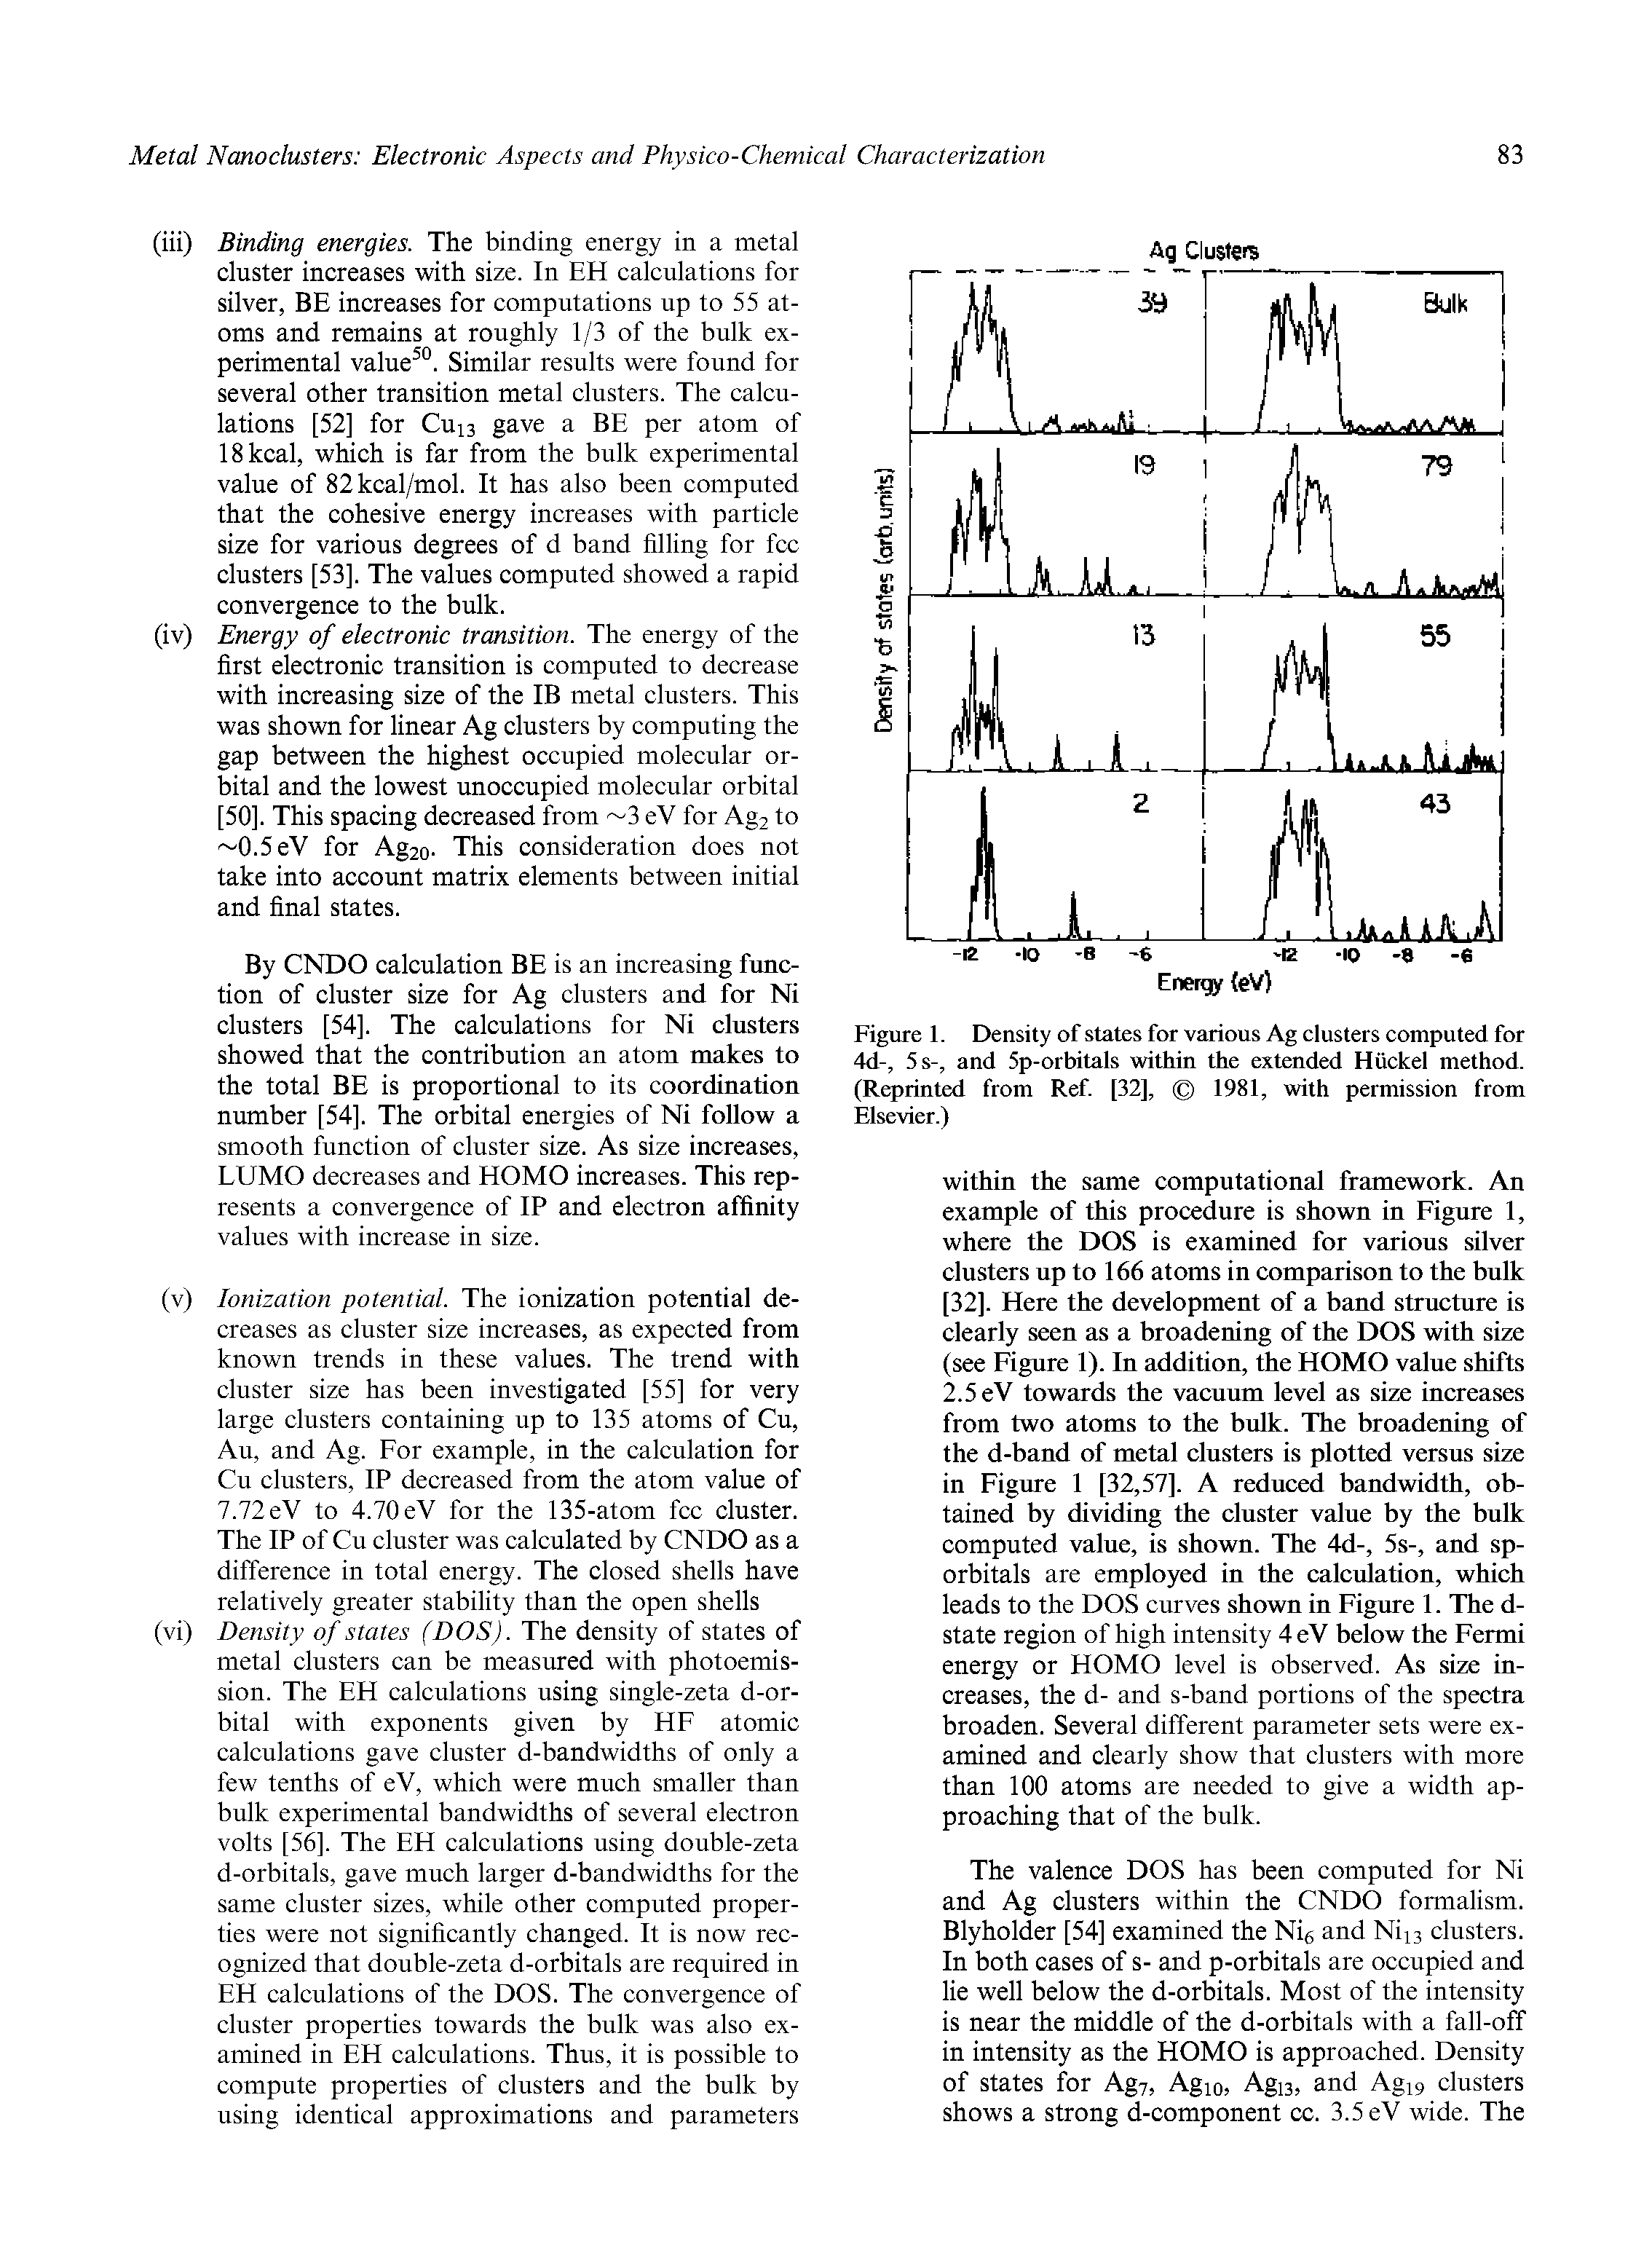 Figure 1. Density of states for various Ag clusters computed for 4d-, 5 s-, and 5p-orbitals within the extended Hiickel method. (Reprinted from Ref [32], 1981, with permission from Elsevier.)...